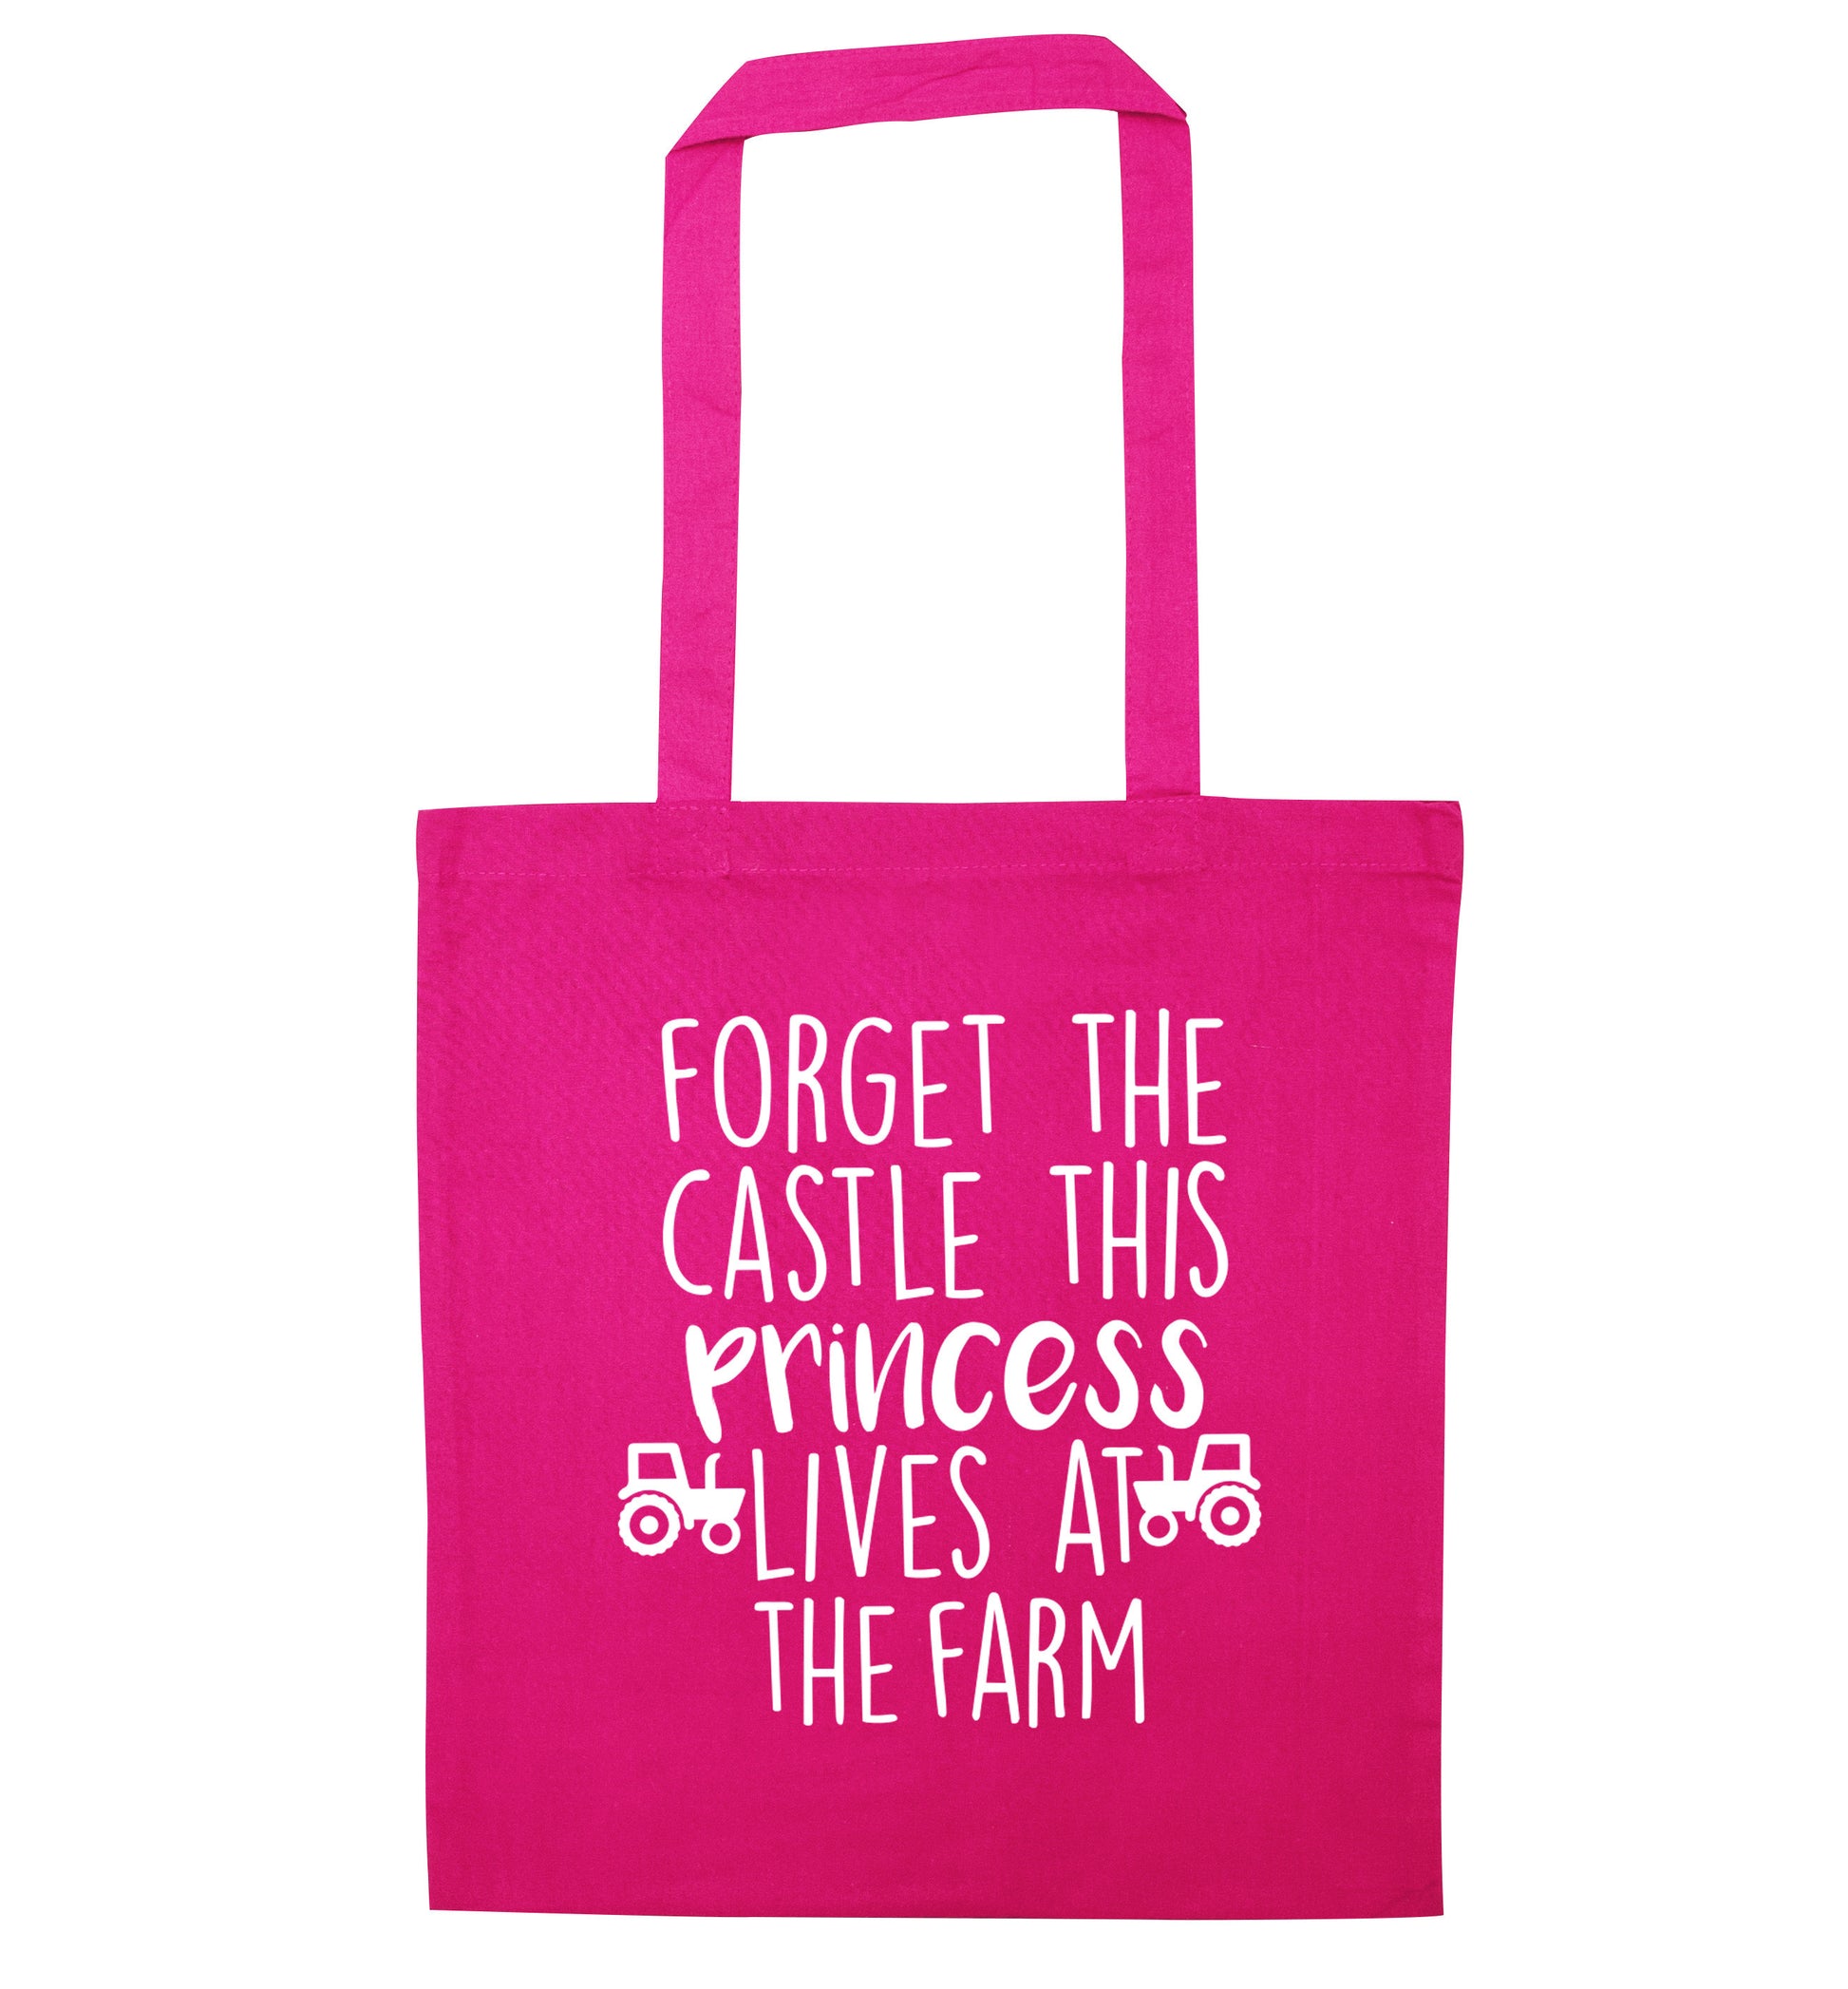 Forget the castle this princess lives at the farm pink tote bag